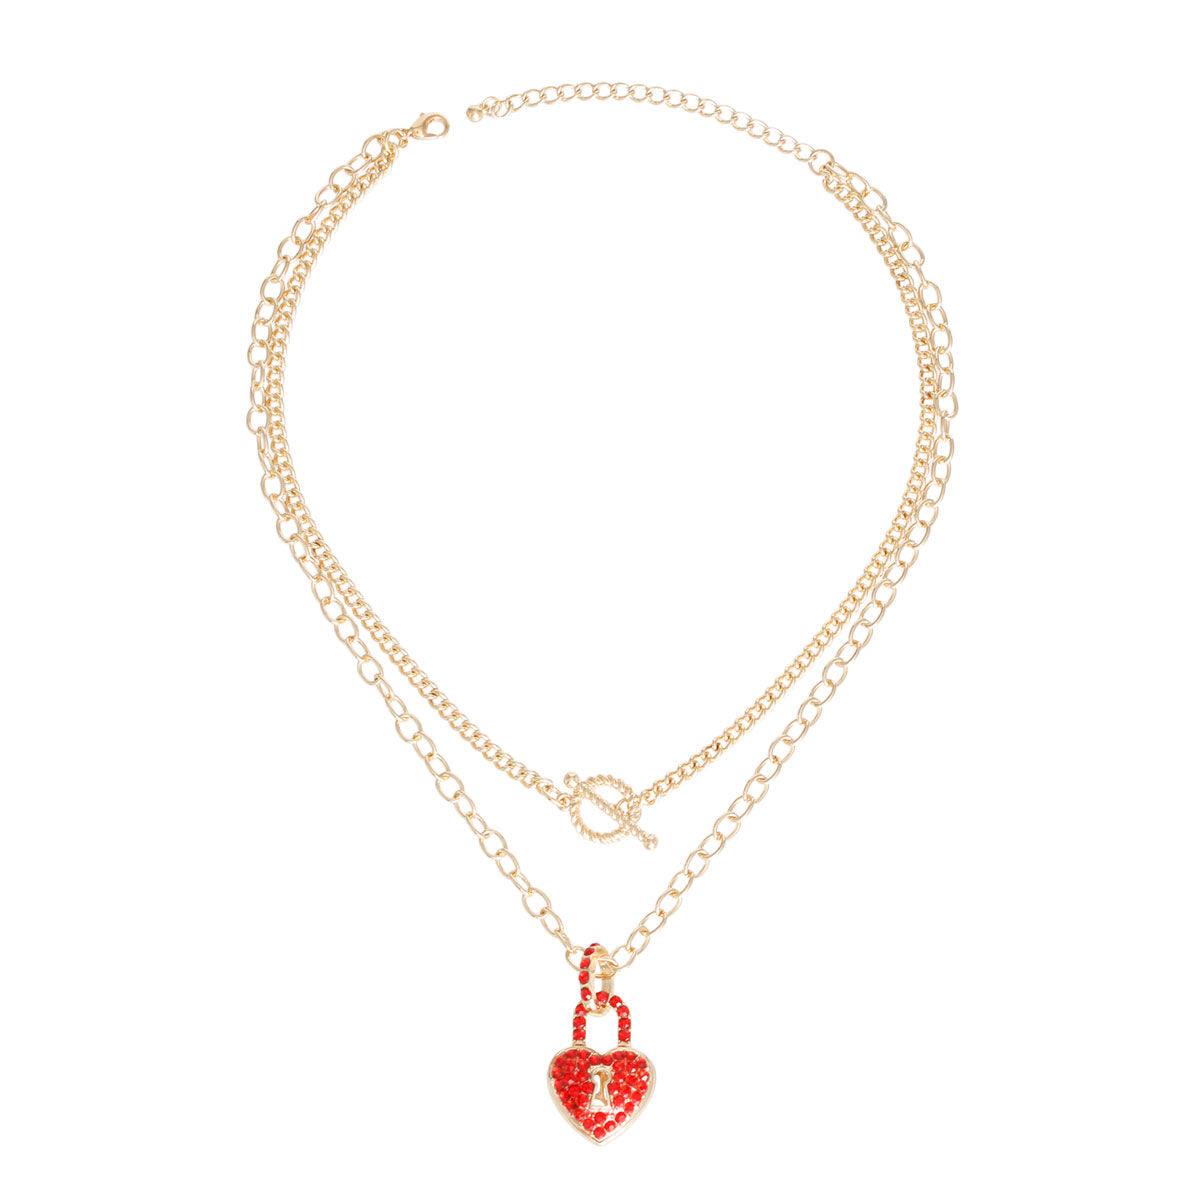 Yellow Gold Plated Chain Necklace w/ Red Lock Heart Charm